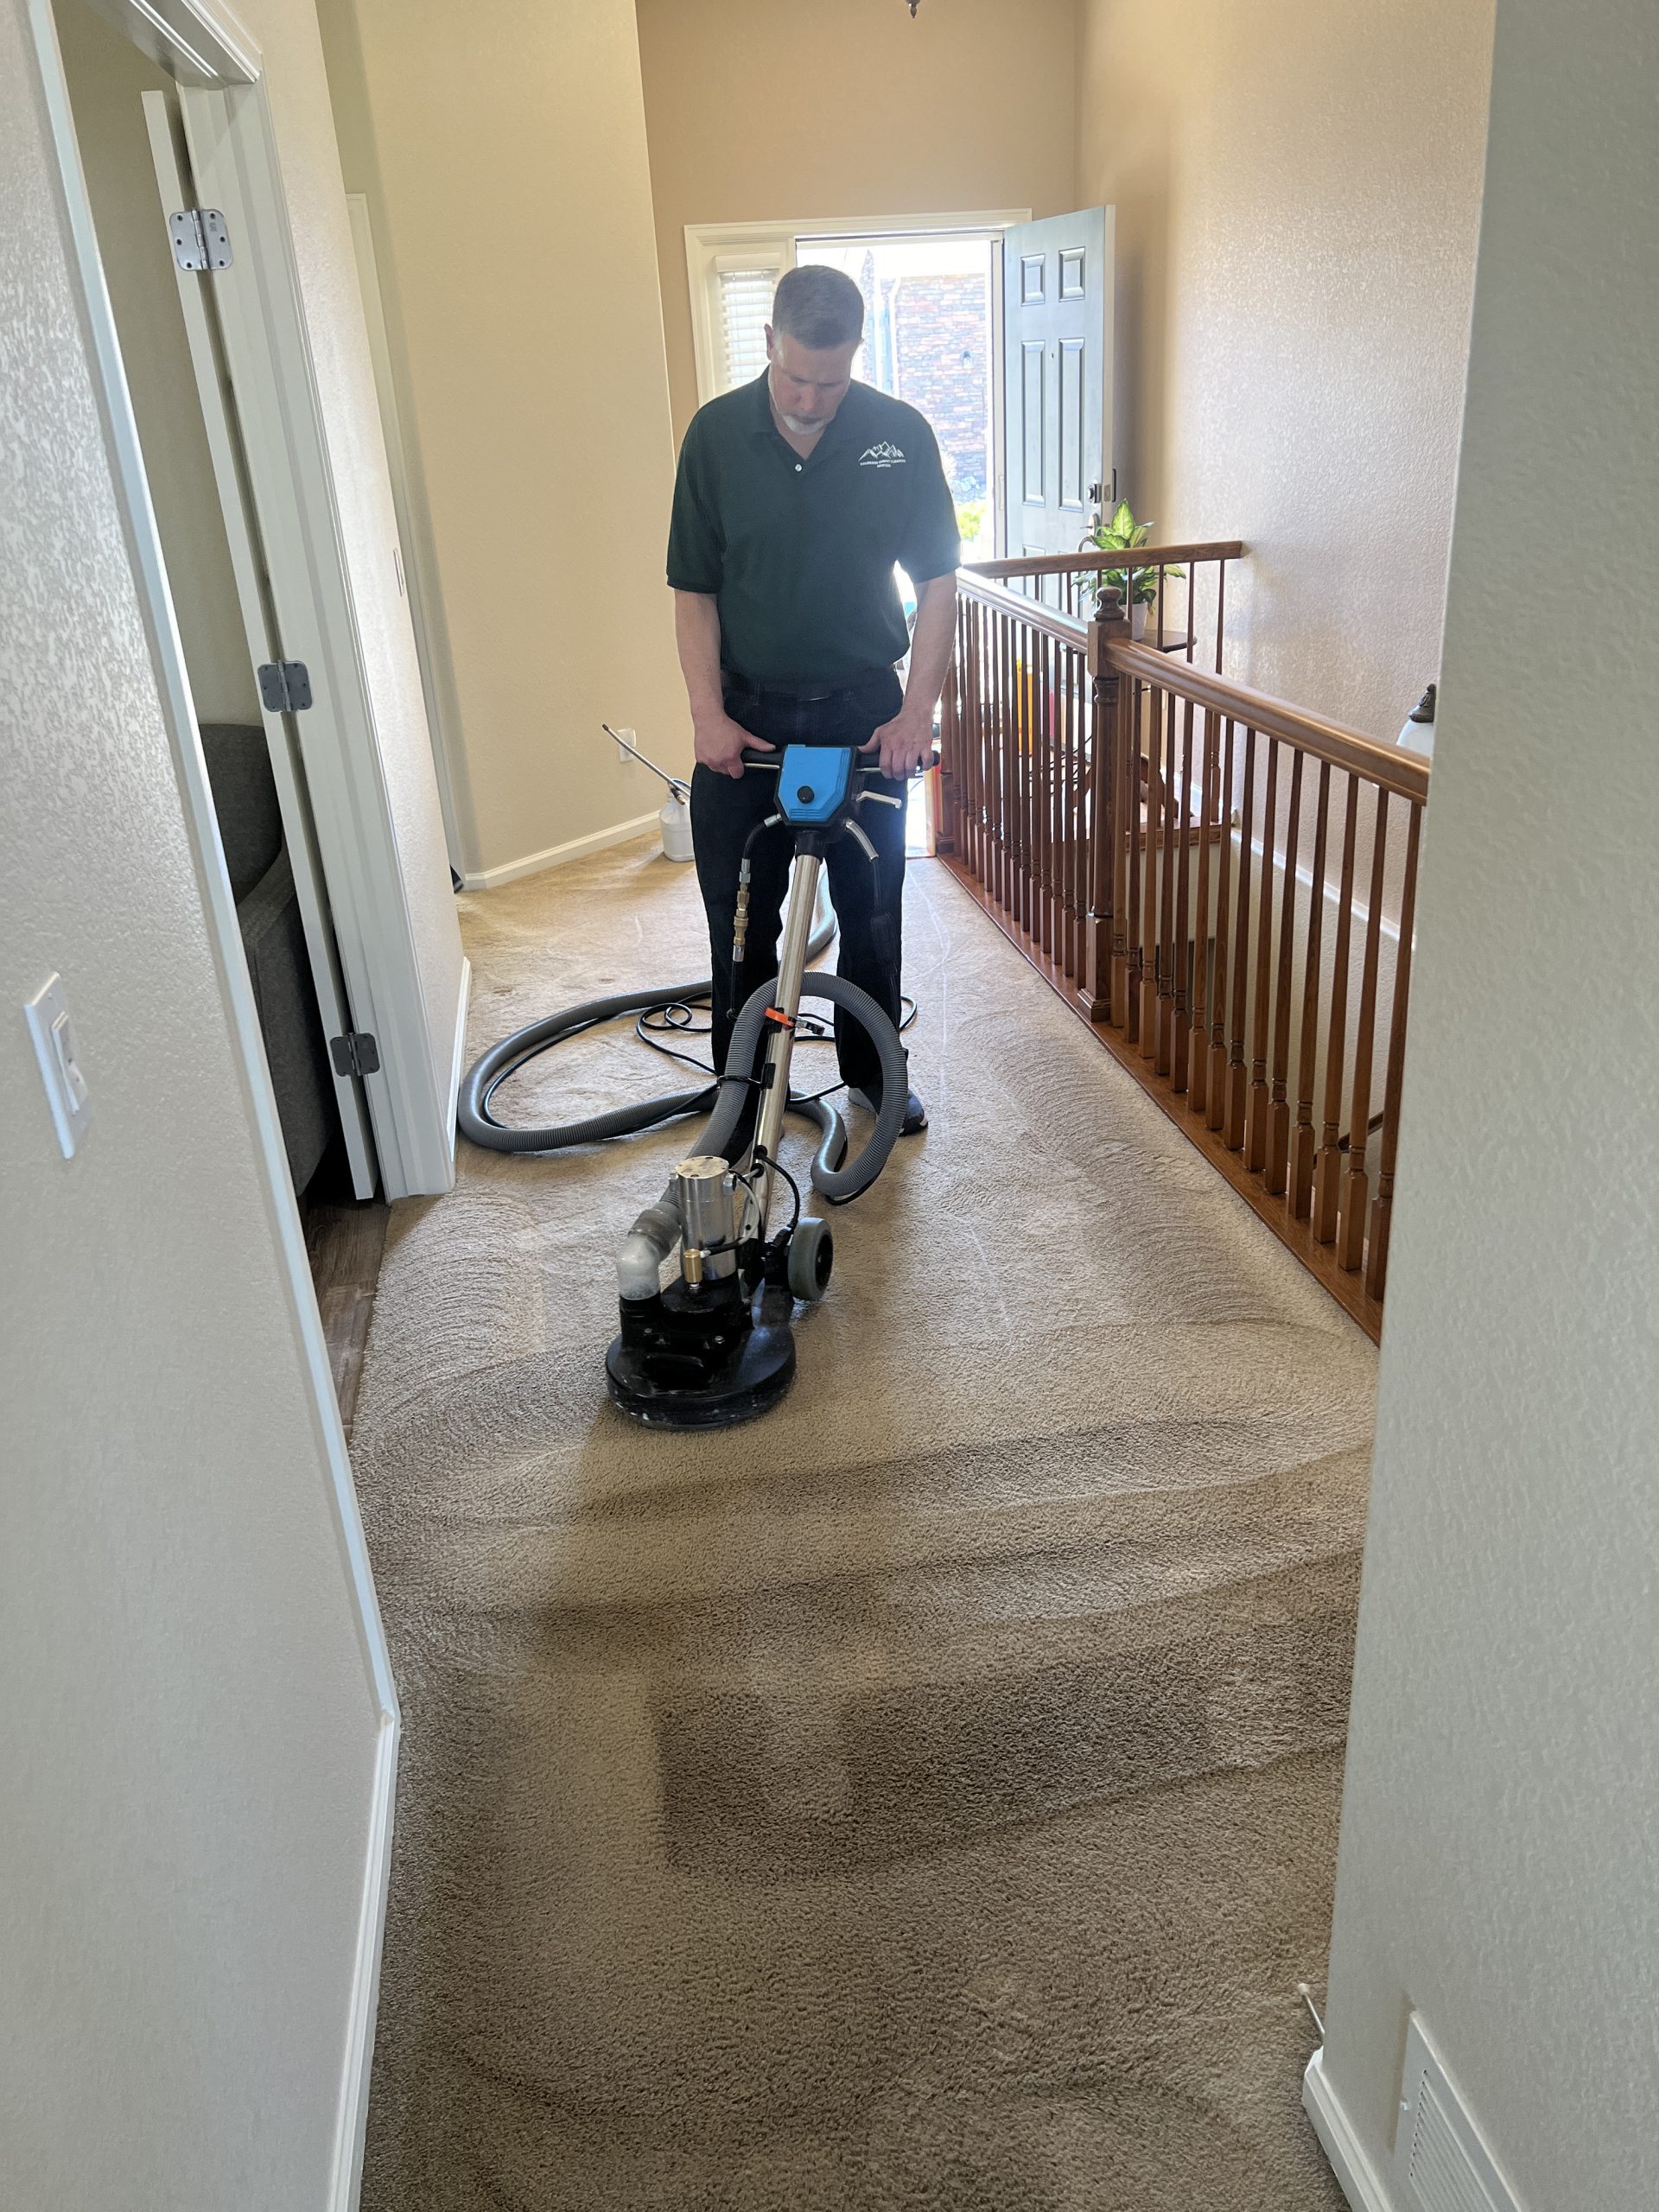 Colorado Carpet Masters 303 459 2482 Keith Wroblewski is cleaning carpets in Brighton CO with t rex power wand showing why they are best carpet cleaning company in brighton co.